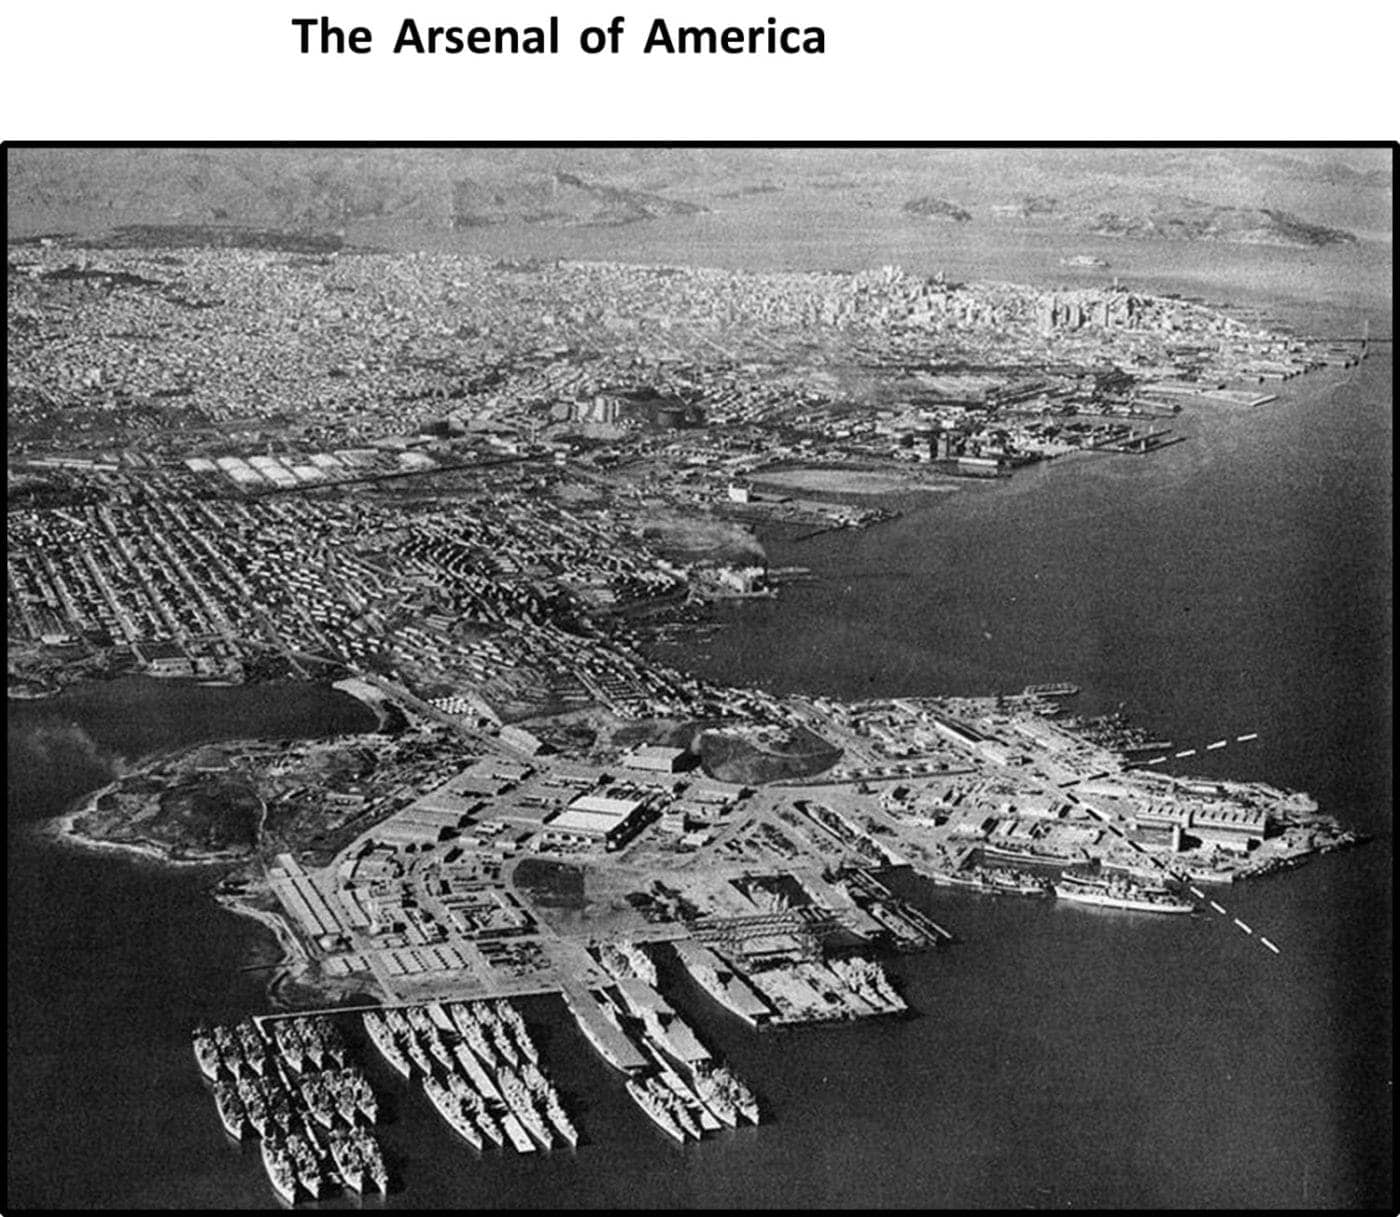 Hunters-Point-Naval-Shipyard-berths-and-dry-docks-jammed-with-ships-1957-cy-Prelinger-Archives-SF-Found-1400x1217, Community Window on Environmental Exposures    , Local News & Views 